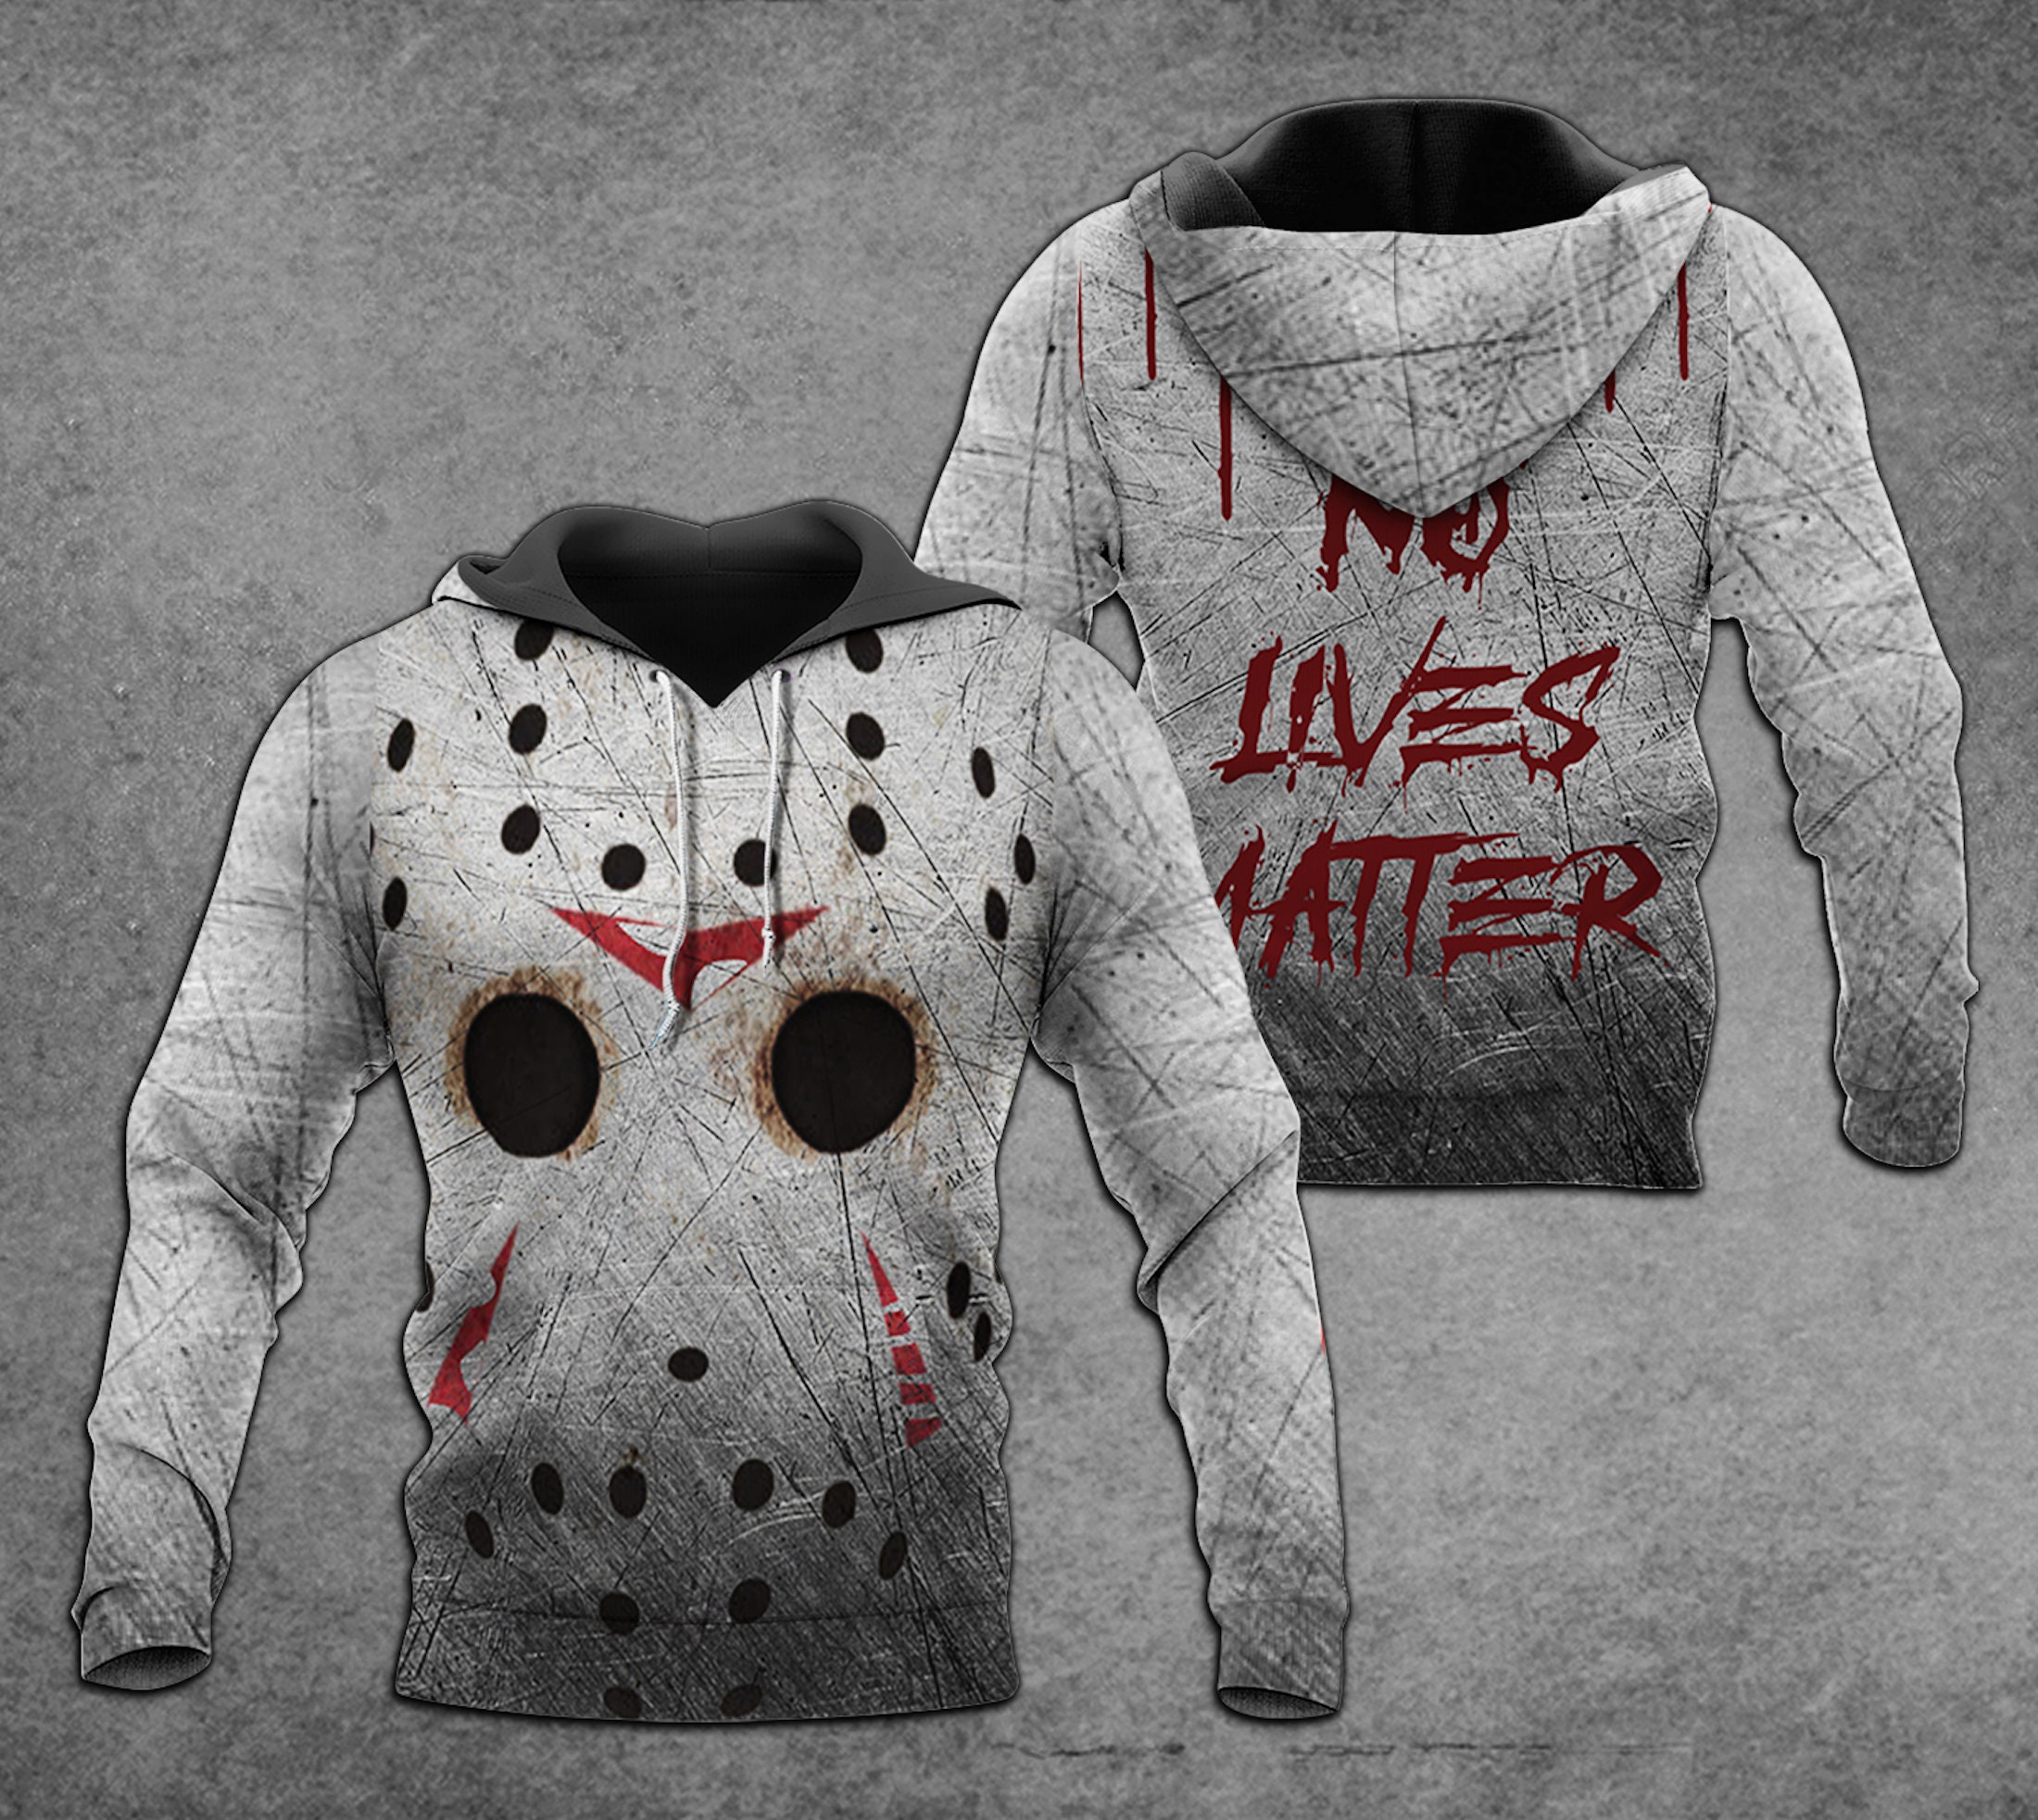 Jason Voorhees No Lives Matter Camp Crystal Lake Jason Voorhees Friday The 13th Pullover All Over Print Hoodie